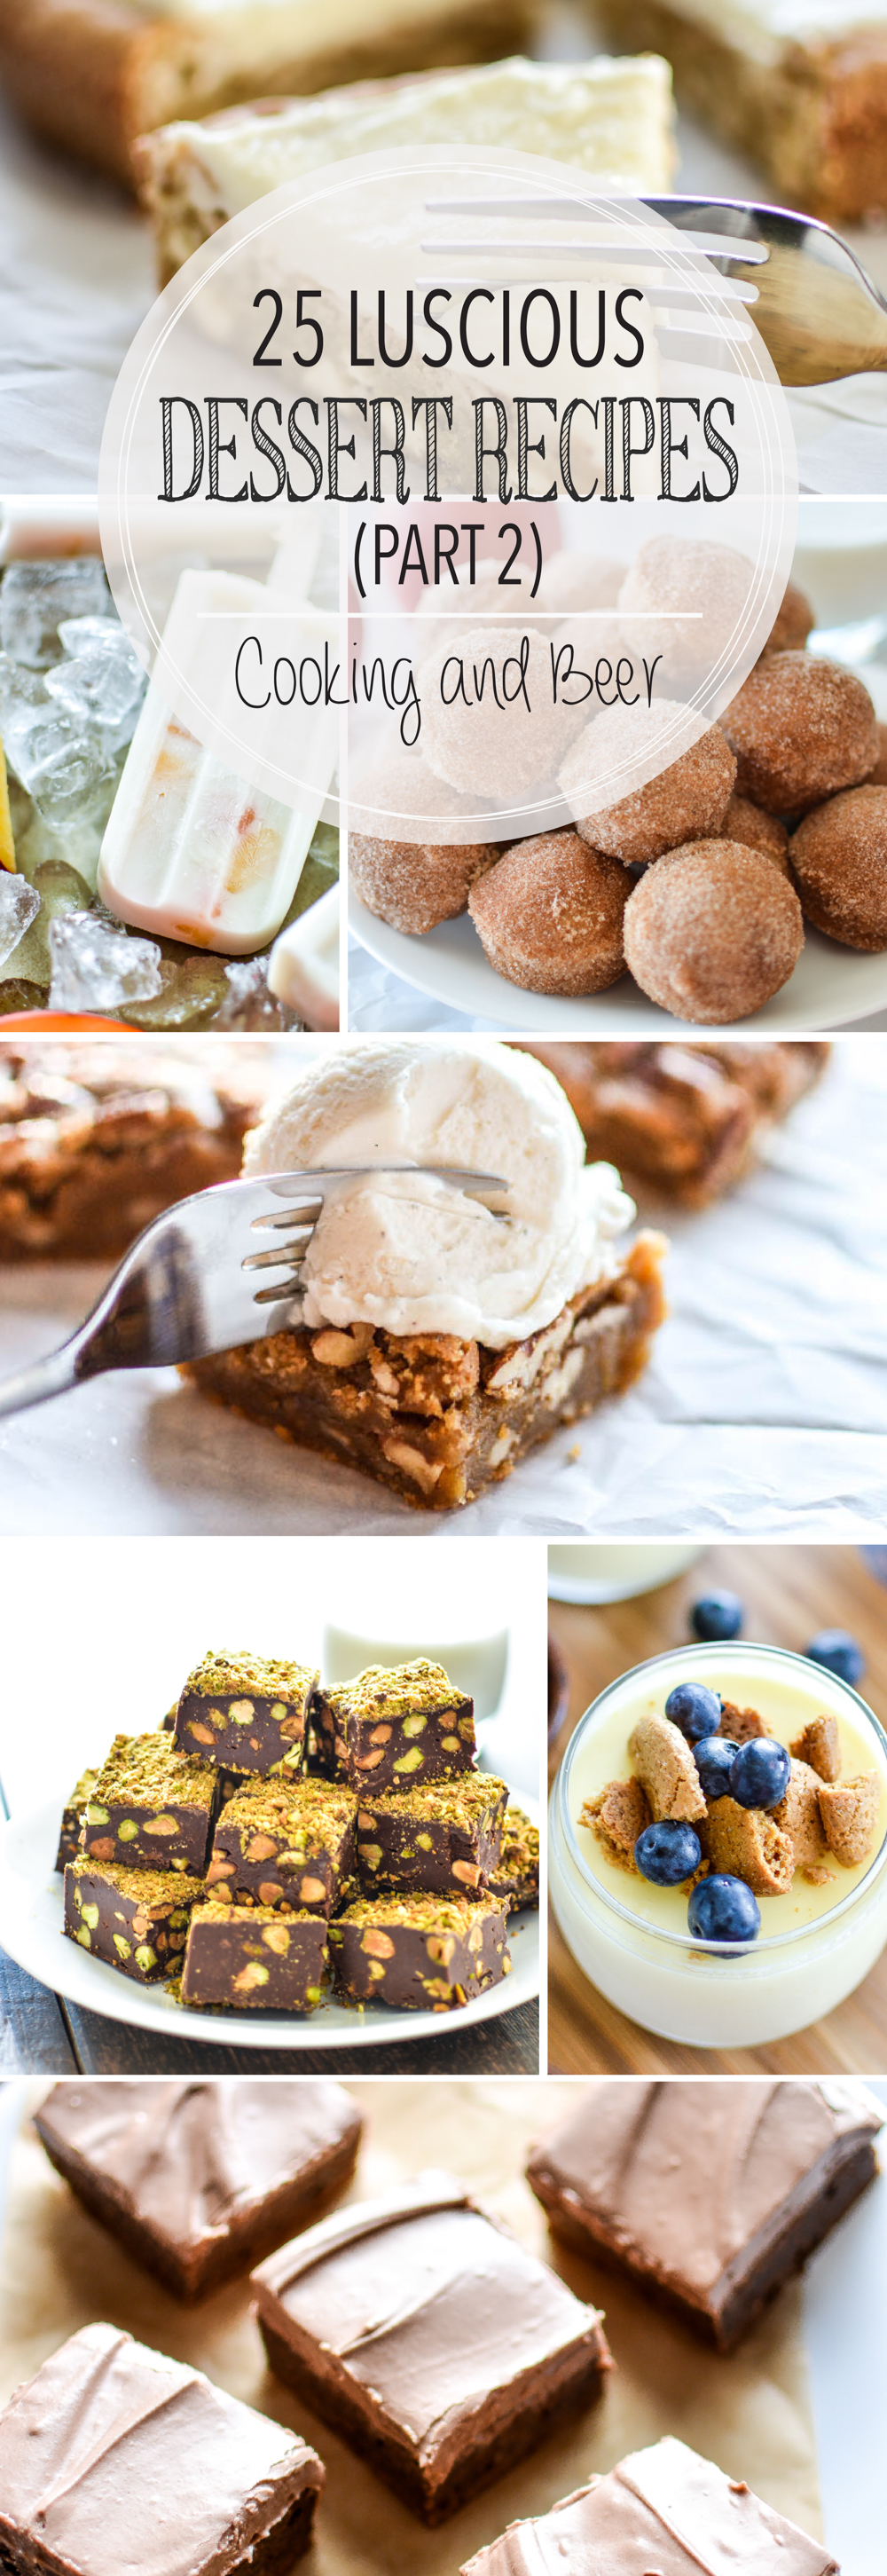 25 Luscious Dessert Recipes (Part 2) - Cooking and BeerCooking and Beer